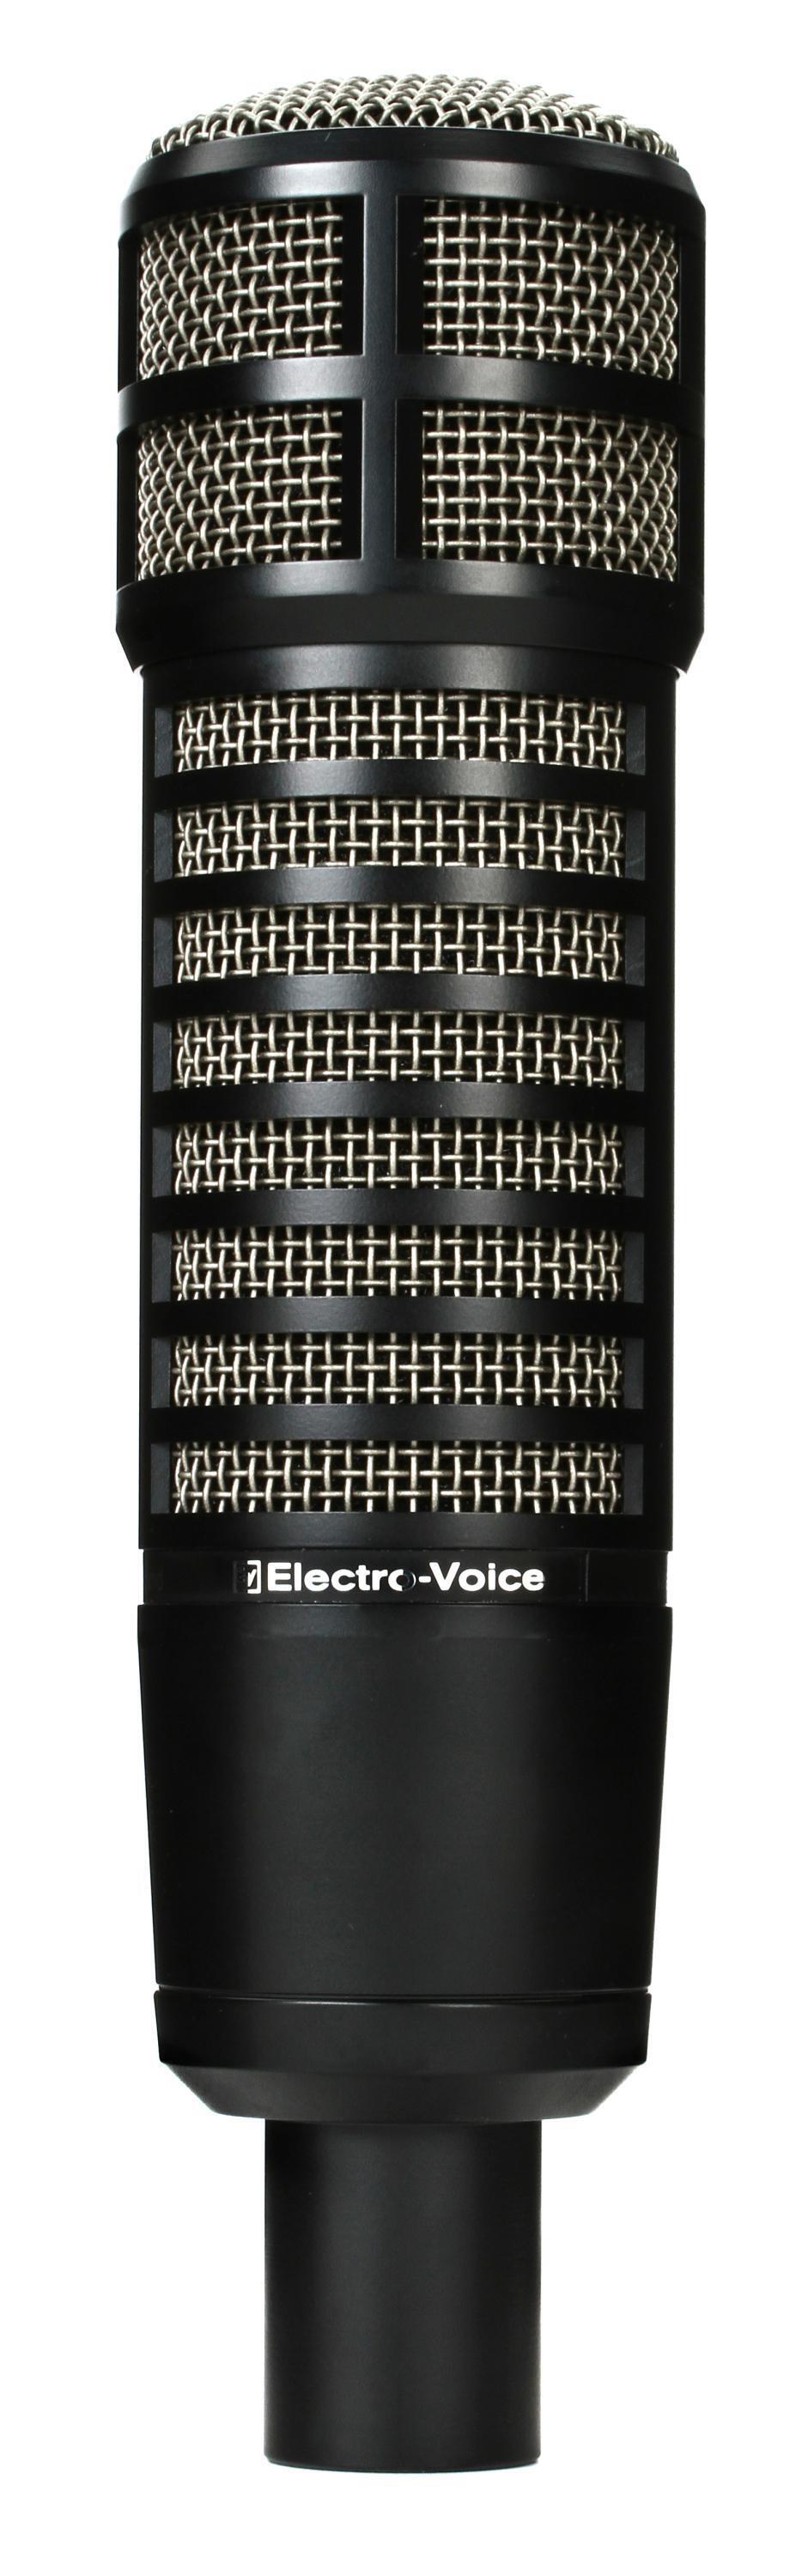 Bundled Item: Electro-Voice RE320 Cardioid Dynamic Broadcast Microphone